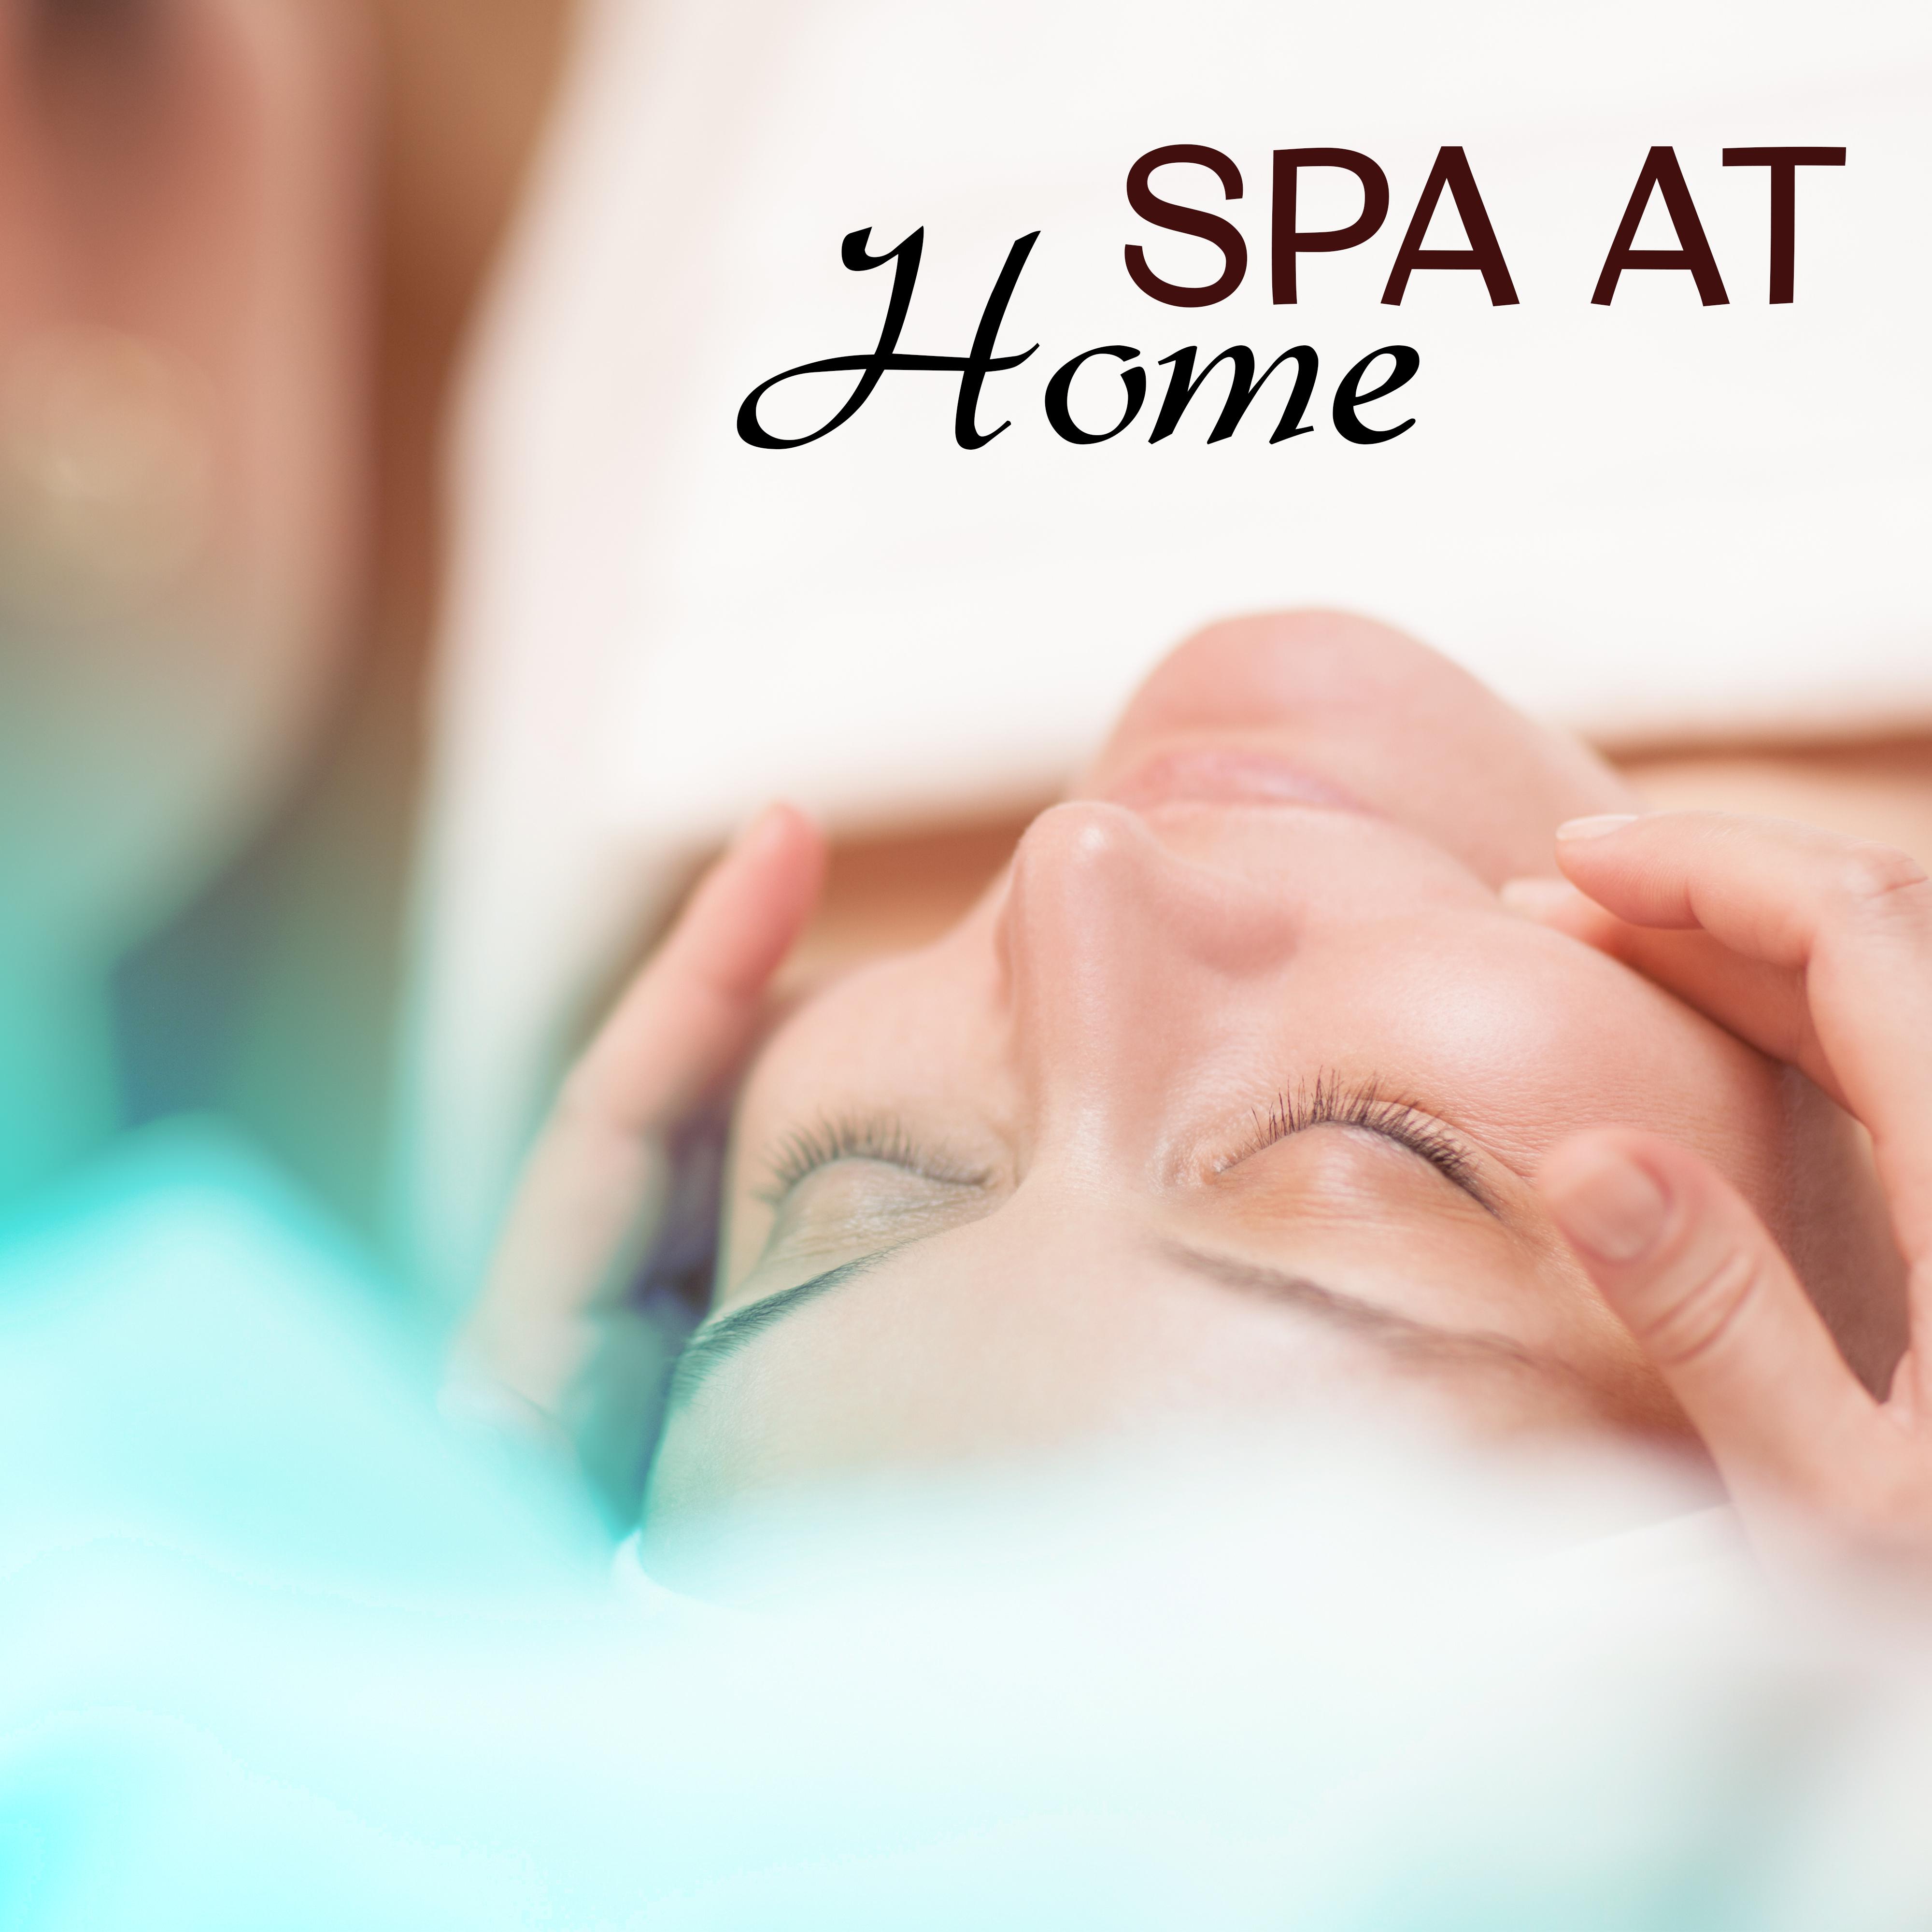 Spa at Home  New Age Music for Spa Relaxation, Lazy Saturday, Positive Vibes